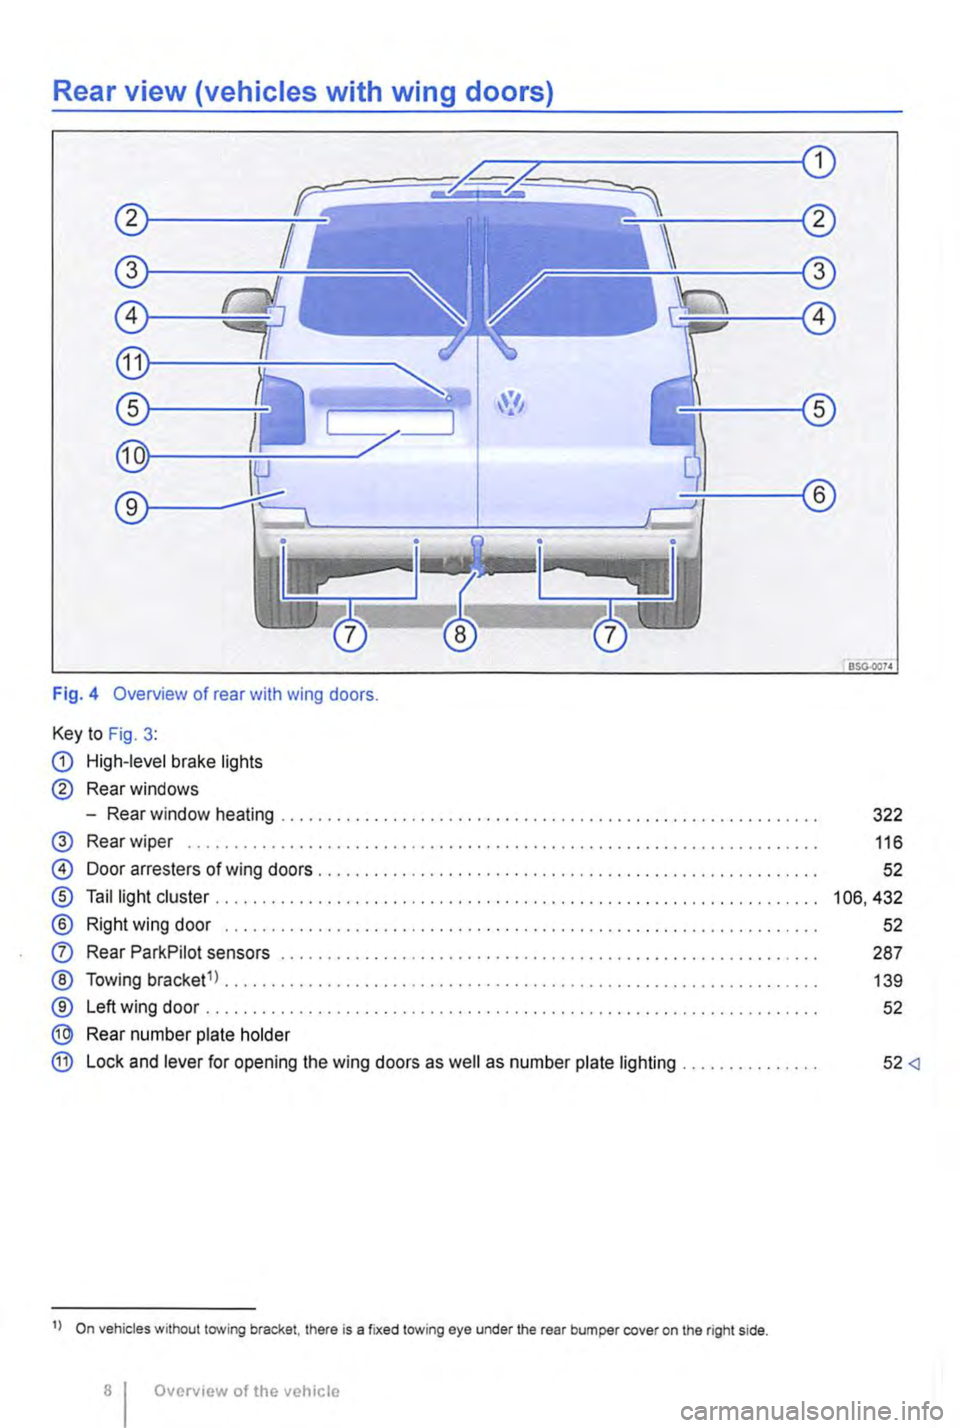 VOLKSWAGEN TRANSPORTER 2014  Owners Manual Rear view (vehicles with wing doors) 
Fig. 4 Overview of rear with wing doors. 
Key to Fig. 3: 
G) High-level brake lights 
® Rear windows 
-Rear window heating ......................................